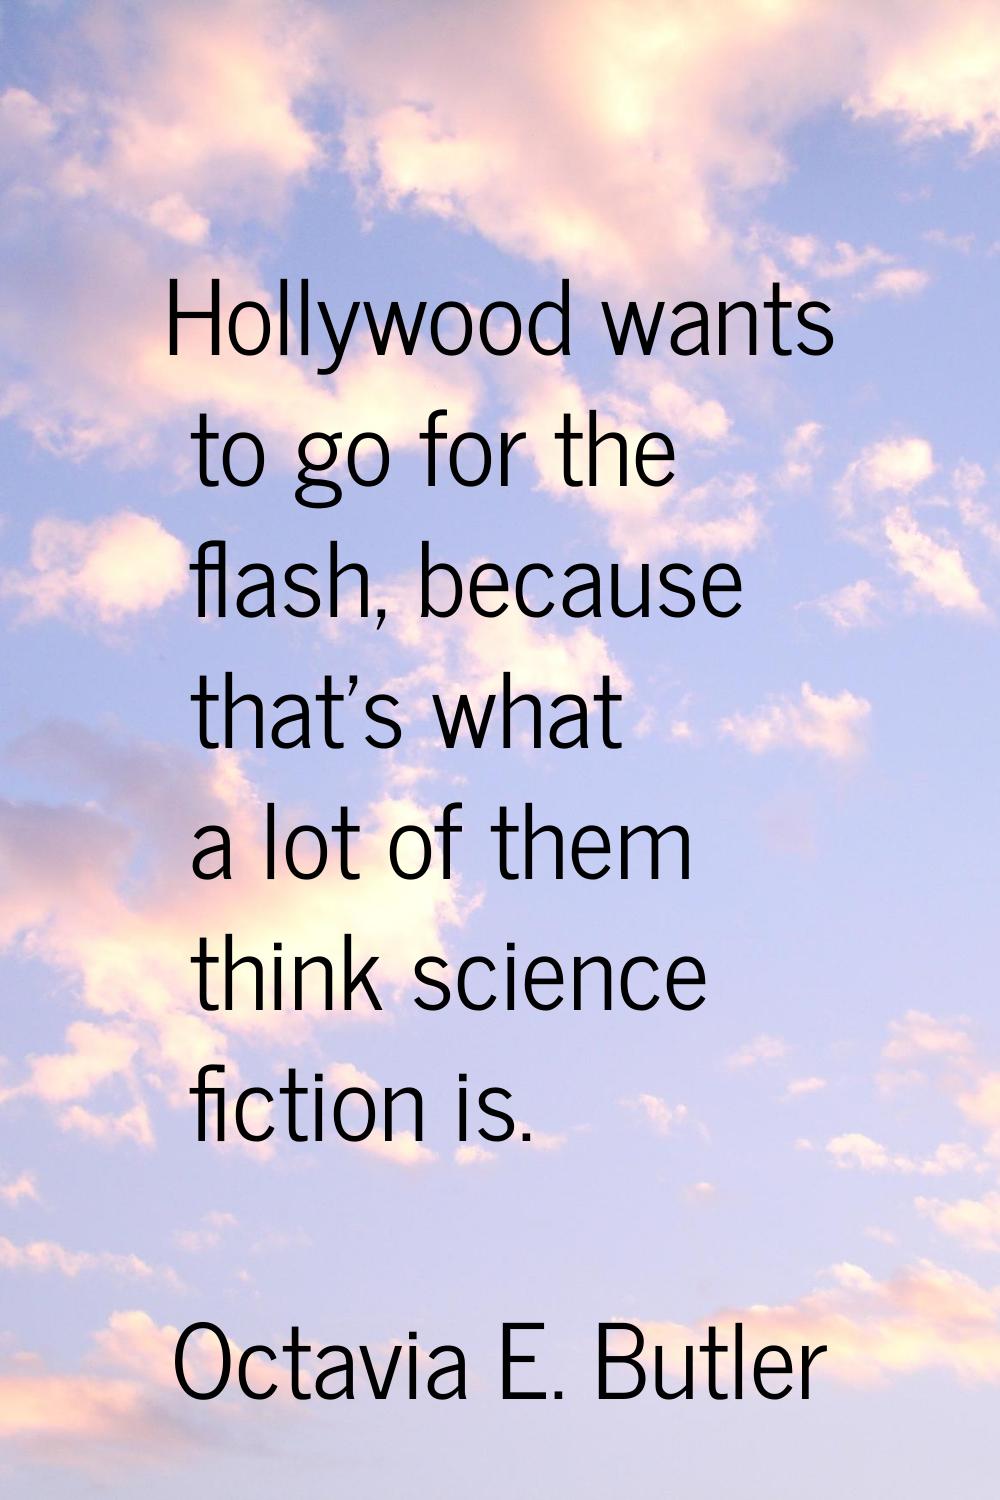 Hollywood wants to go for the flash, because that's what a lot of them think science fiction is.